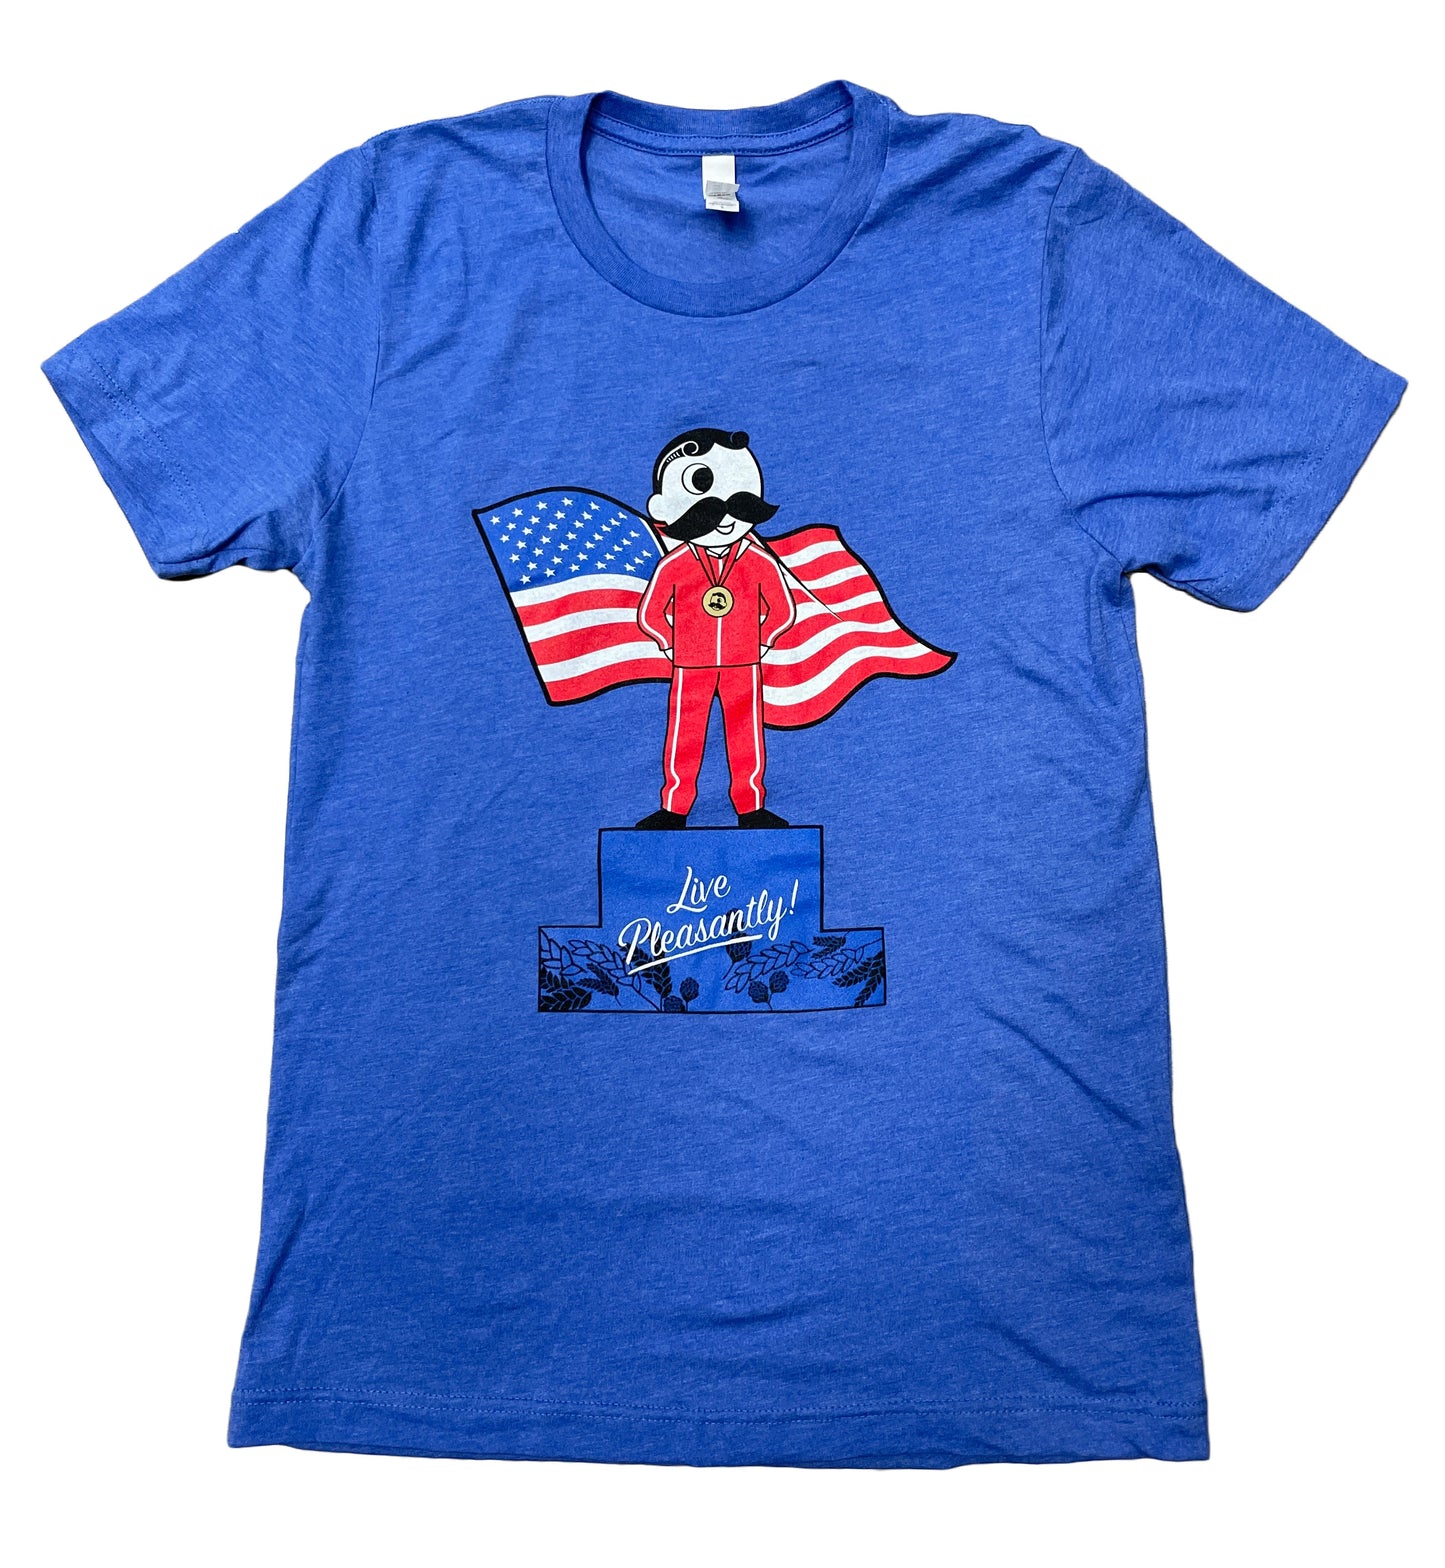 Boh for the Gold (Heather Royal) / Shirt - Route One Apparel